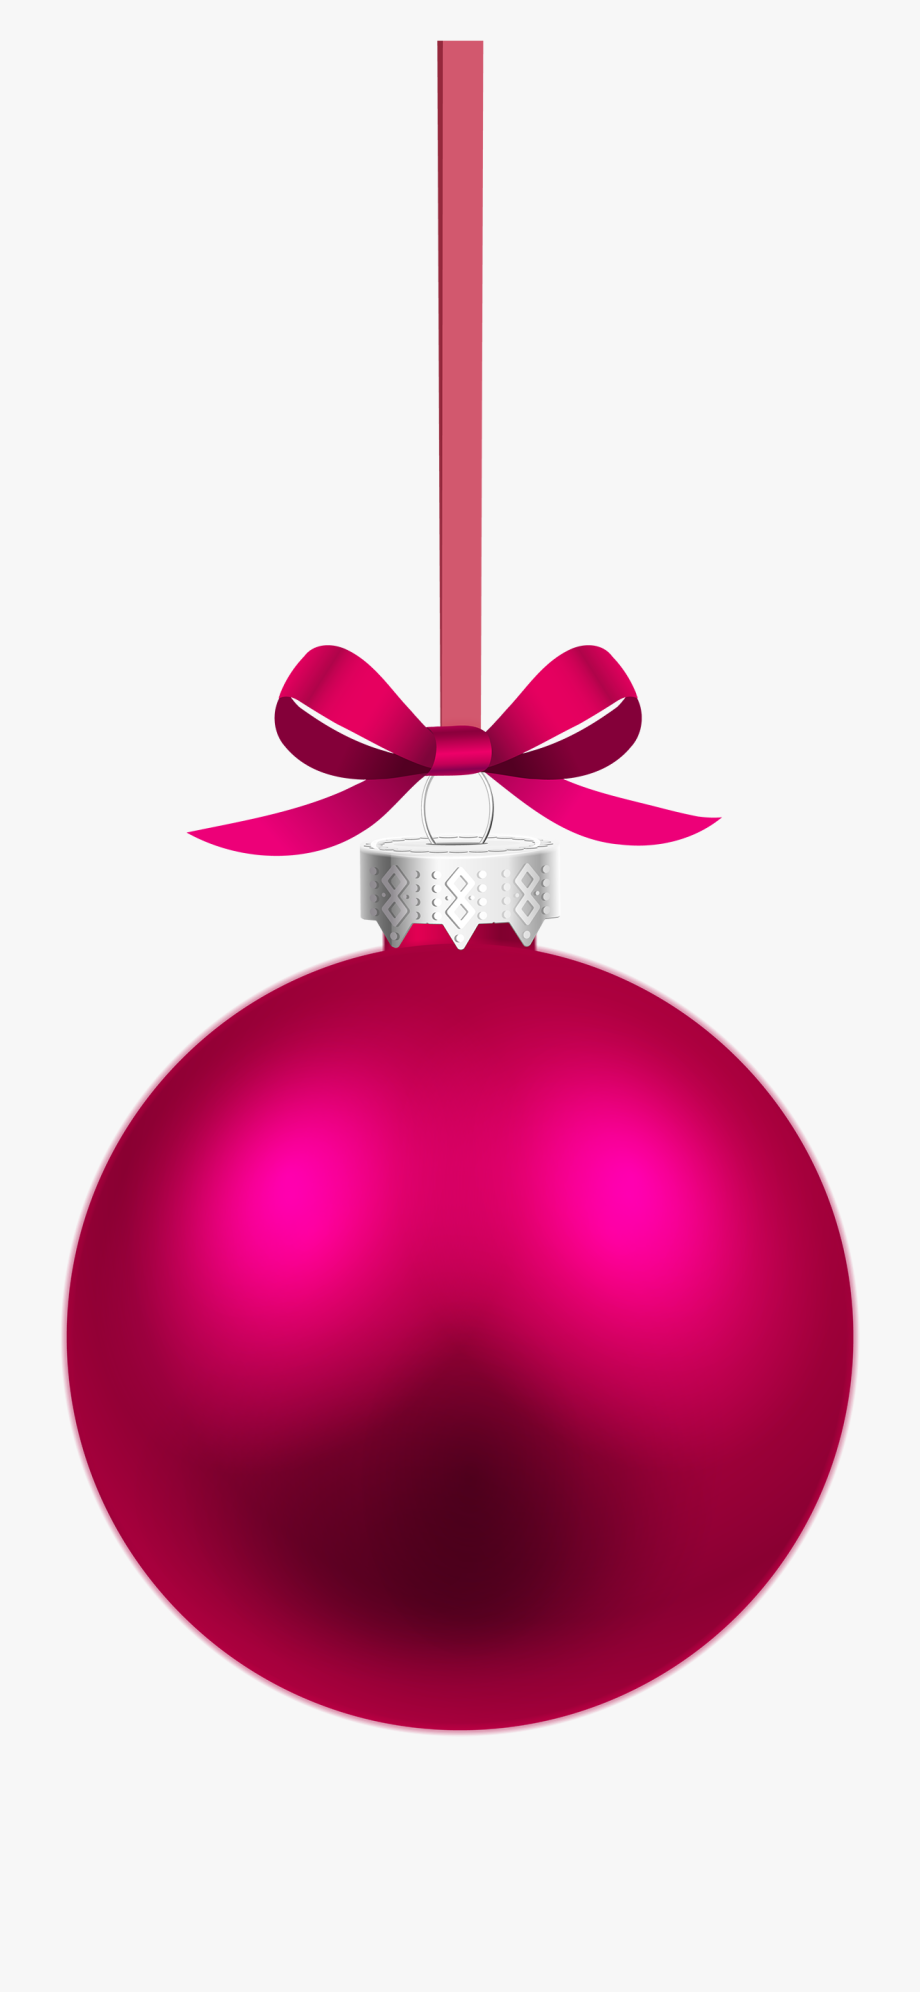 Ornaments clipart pink ornament. Hanging png christmas ball